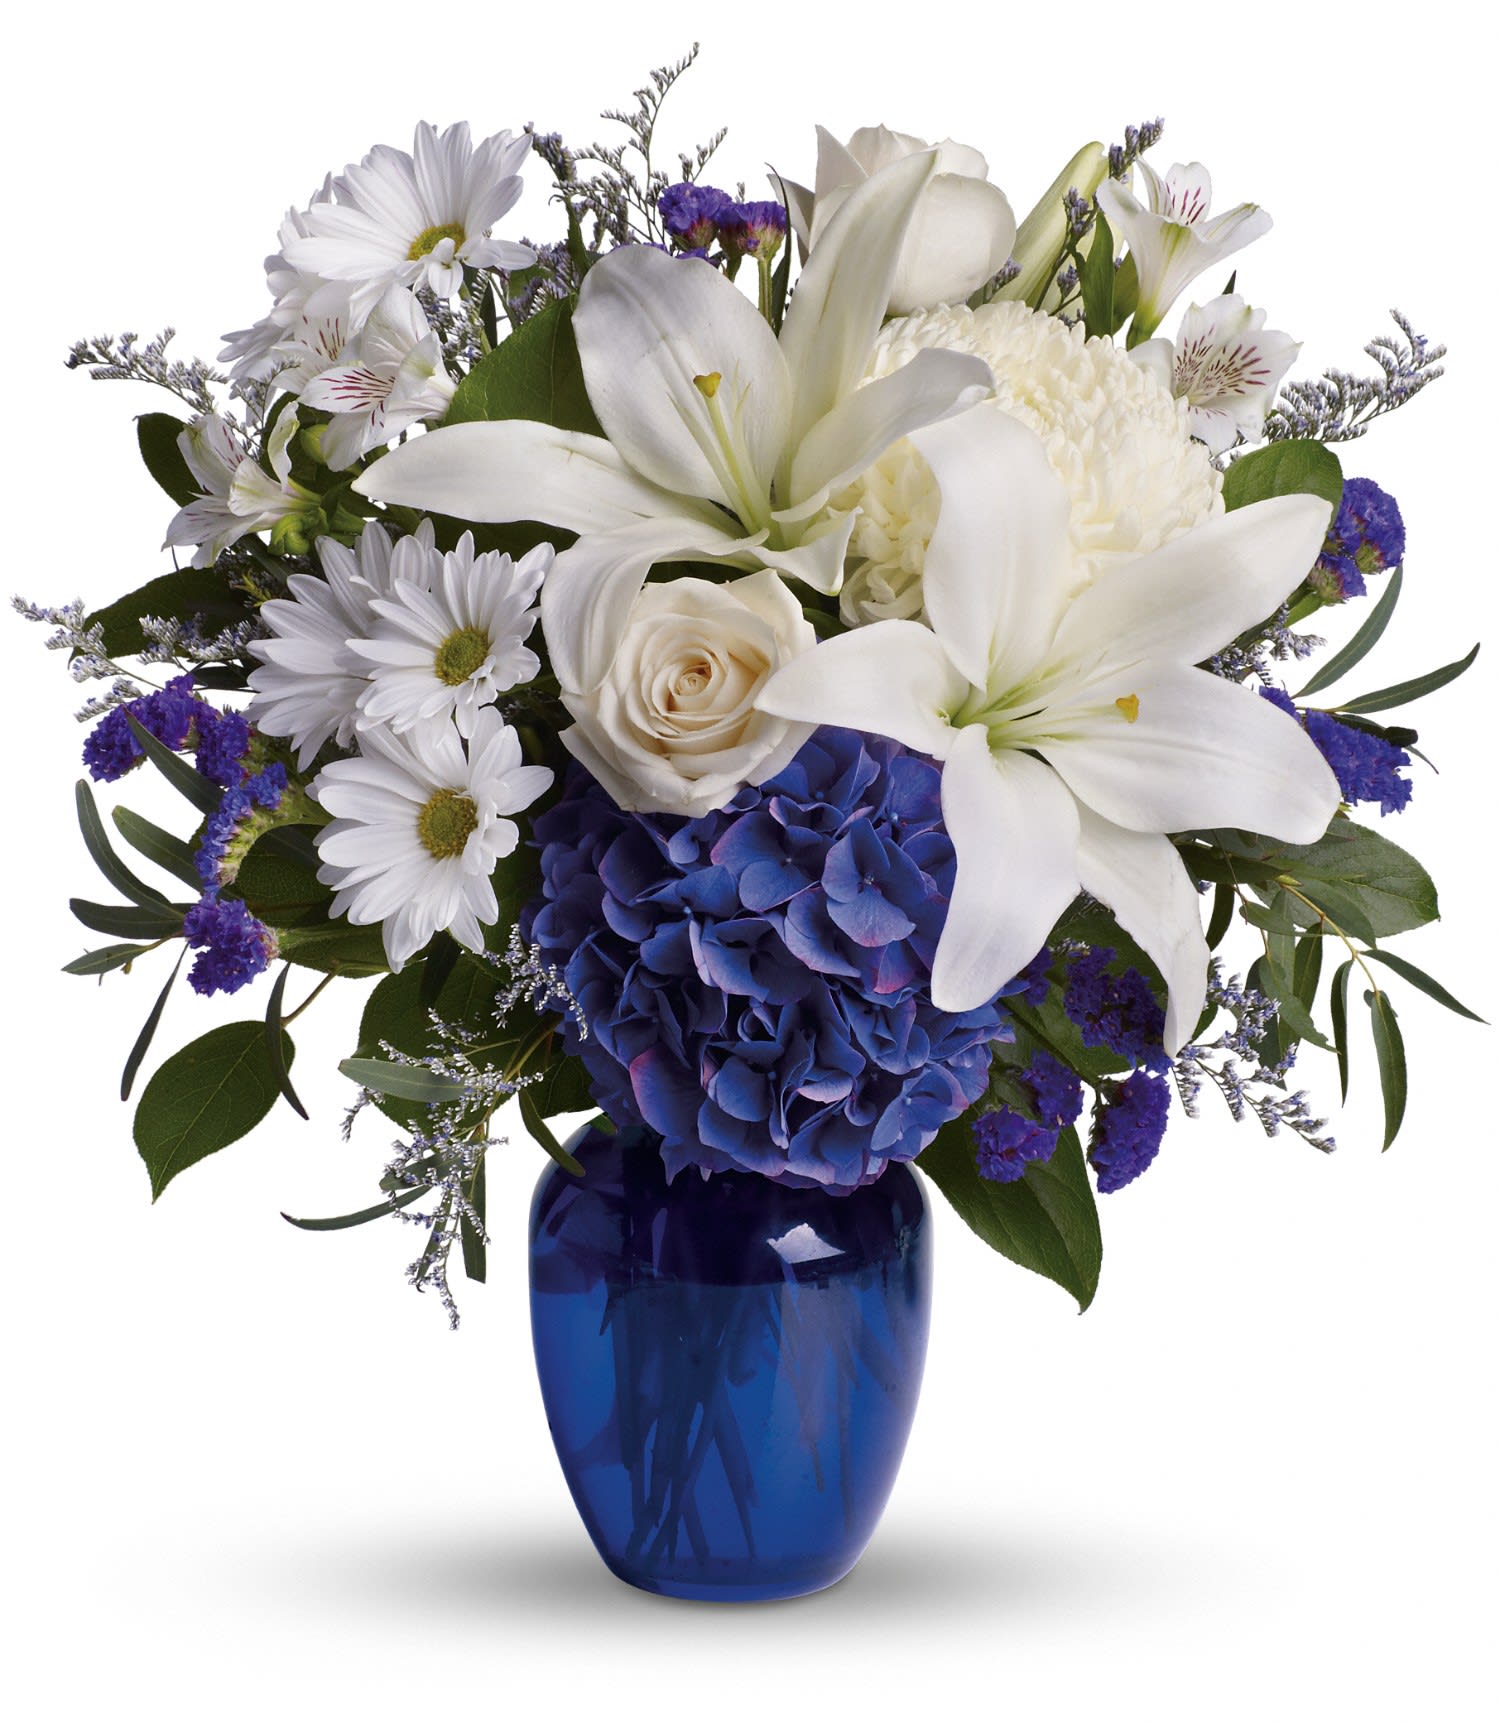 Beautiful in Blue by Teleflora - In this arrangement, the serenity of the color blue along with the purity of intention symbolized by white will let the family know you are sending your calm strength to them during these difficult times.T209-3